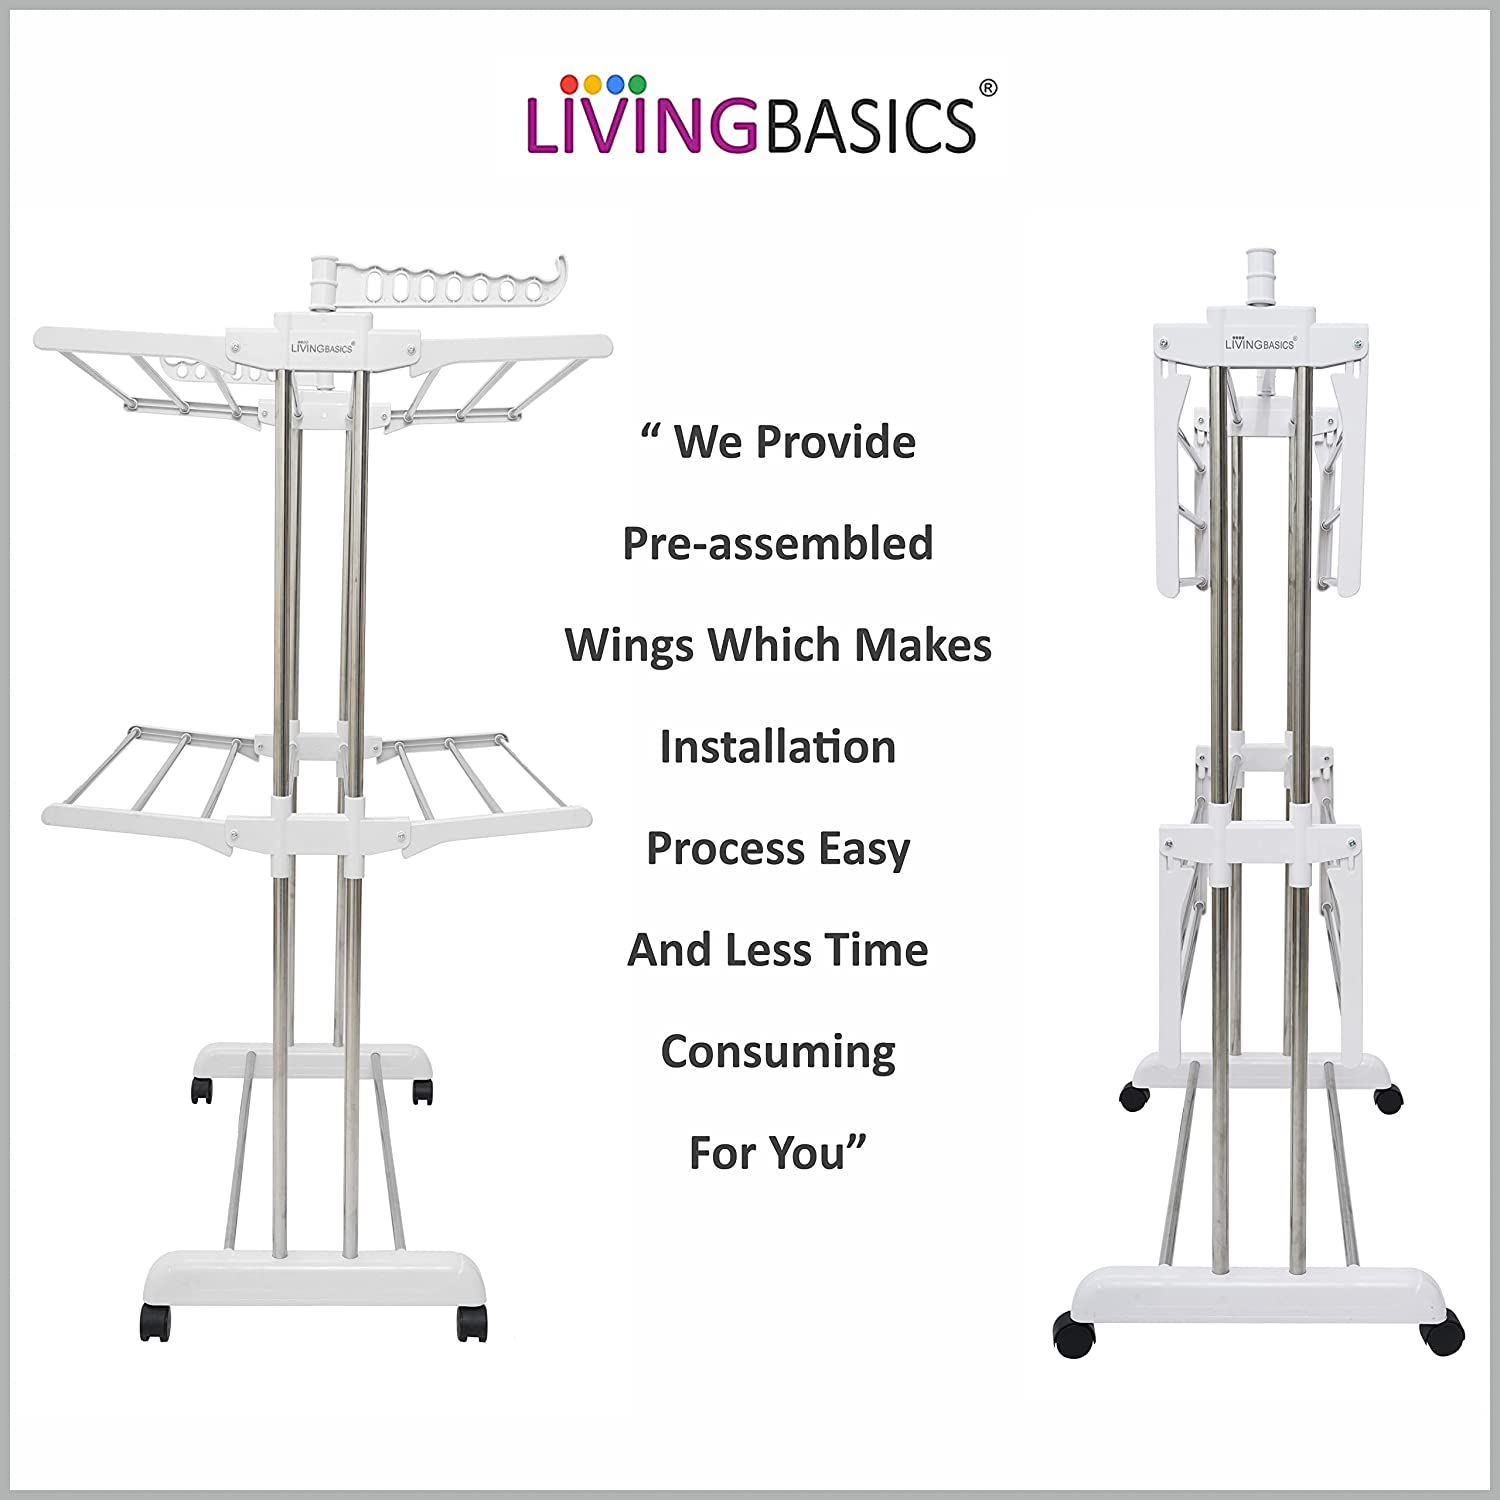 LIVINGBASICS Cloth Drying Stand Rust-Free Stainless Steel & ABS 2 Tier/Layer Foldable Clothes Dryer Rack/Folding Laundry Dry Stands with Wheels for Home/Indoor/Outdoor/Balcony (Snow White)